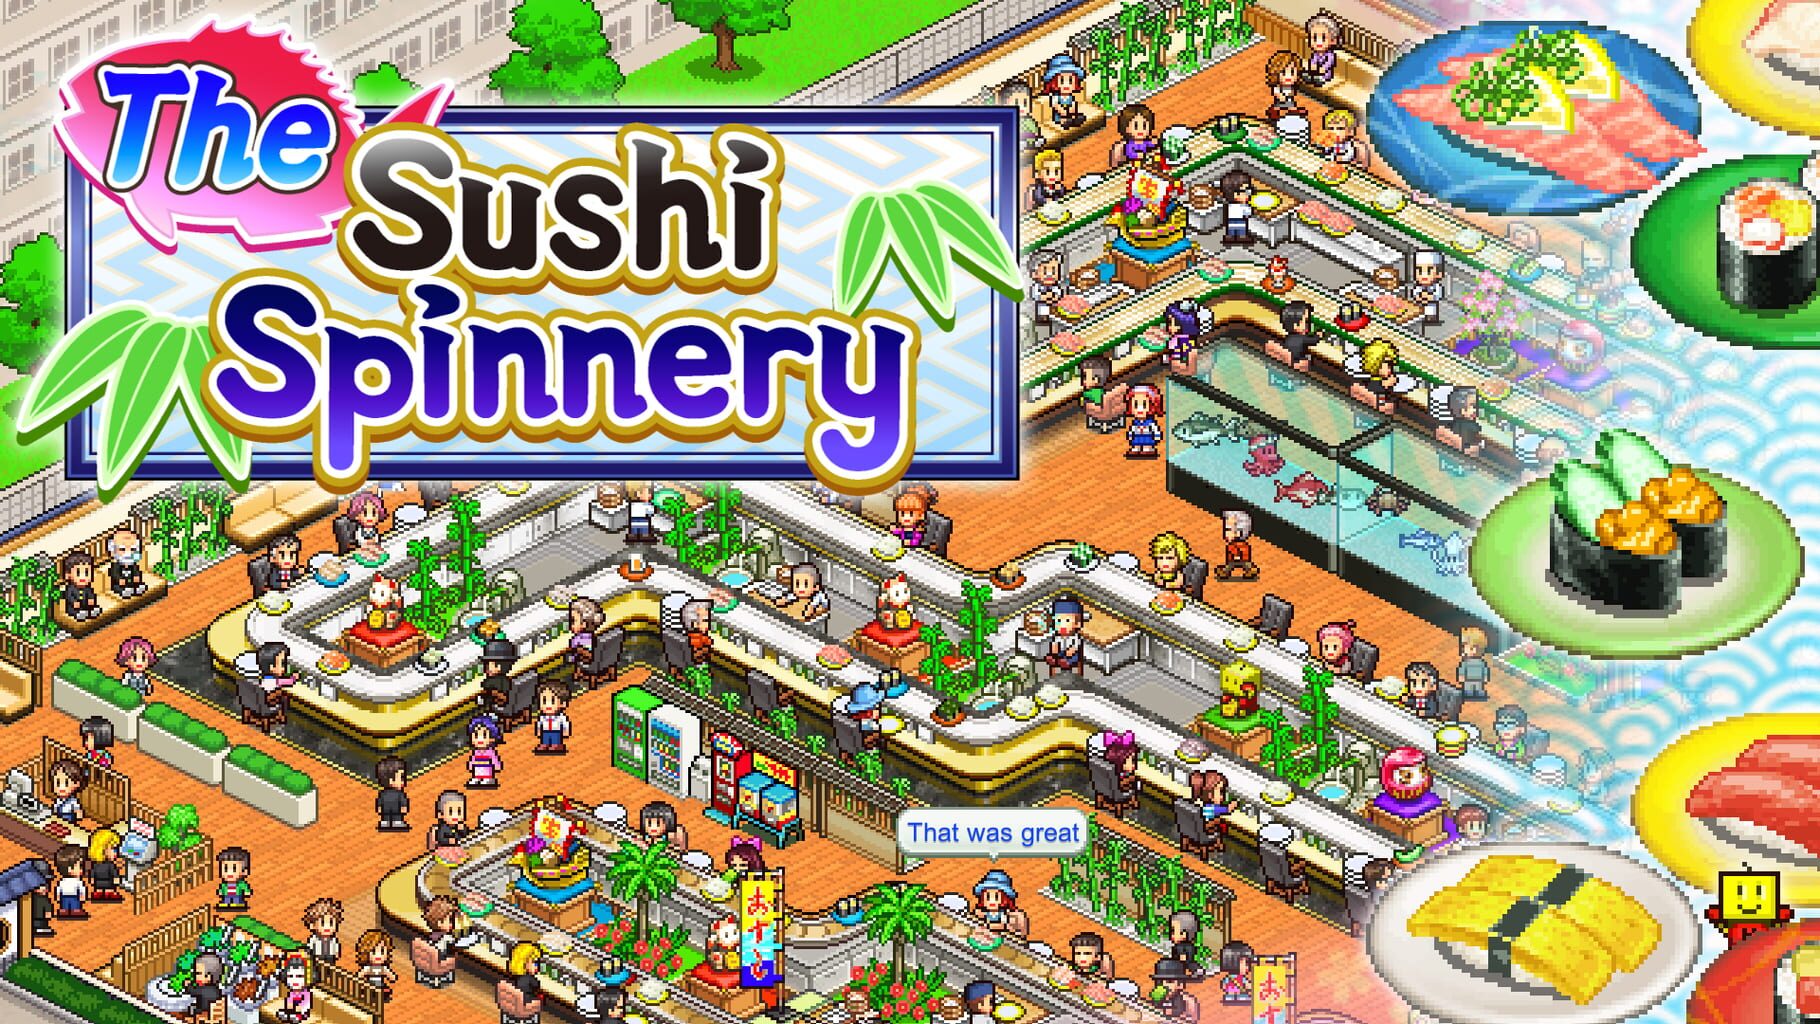 The Sushi Spinnery artwork